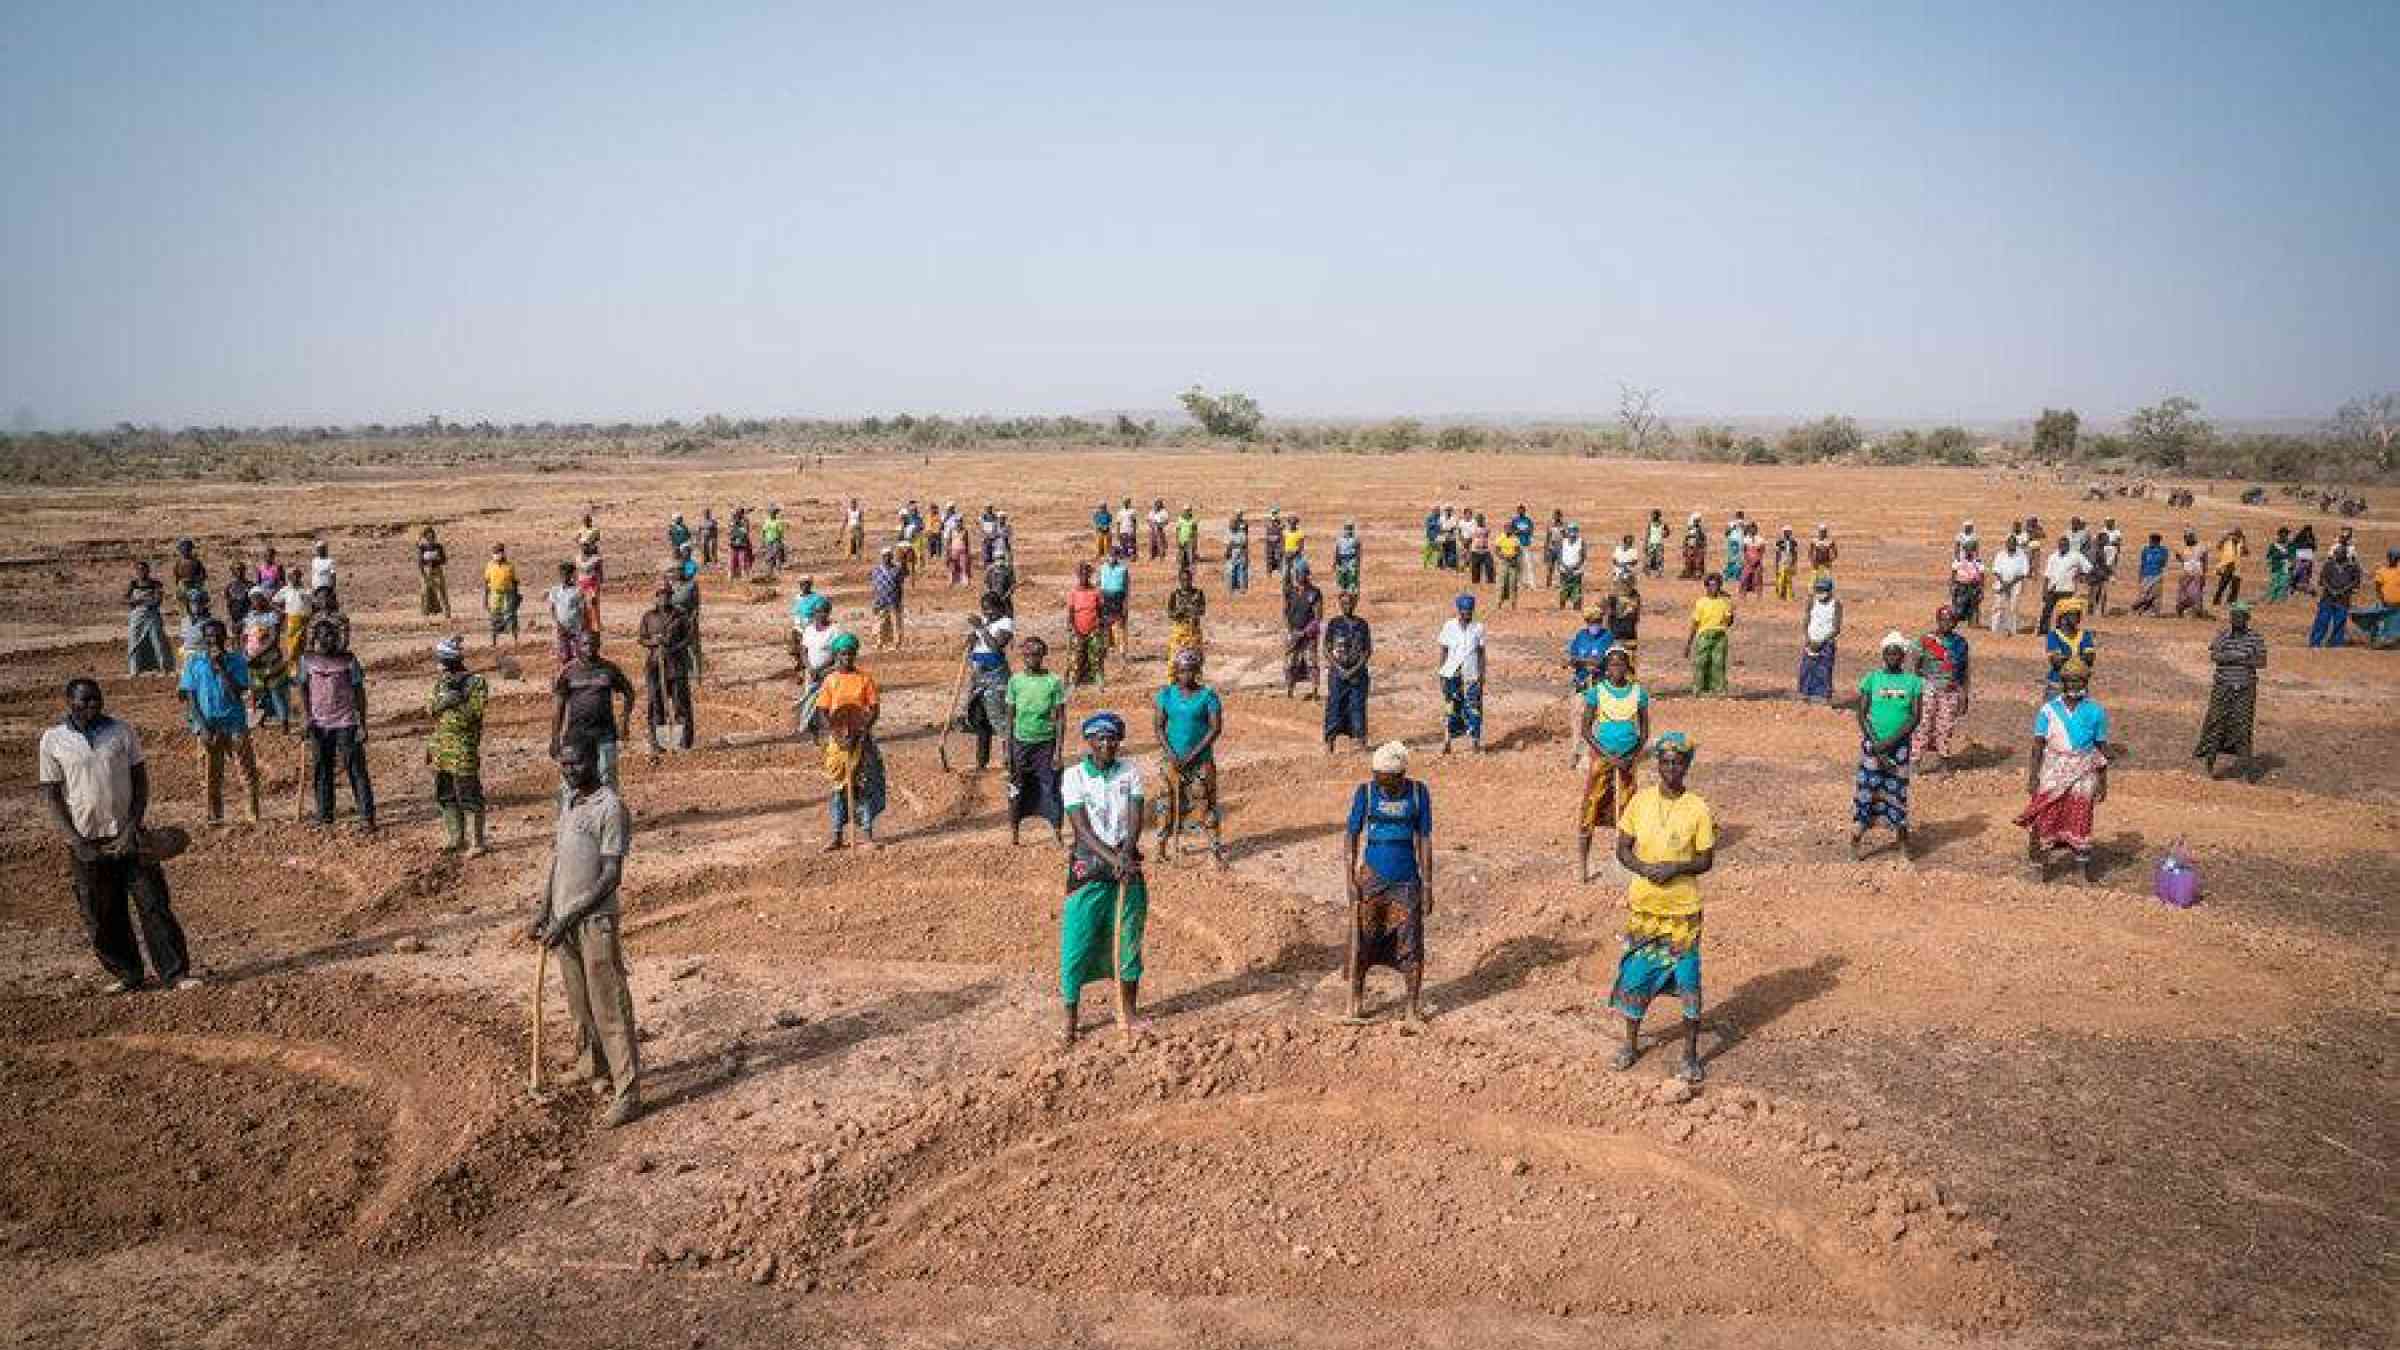 Burkina Faso: Participants in a WFP soil rehabilitation project in Sirighin in March — 2.9 million people will face hunger during the upcoming lean season according to the latest Cadre Harmonisé figures. Photo: WFP/Evelyn Fey